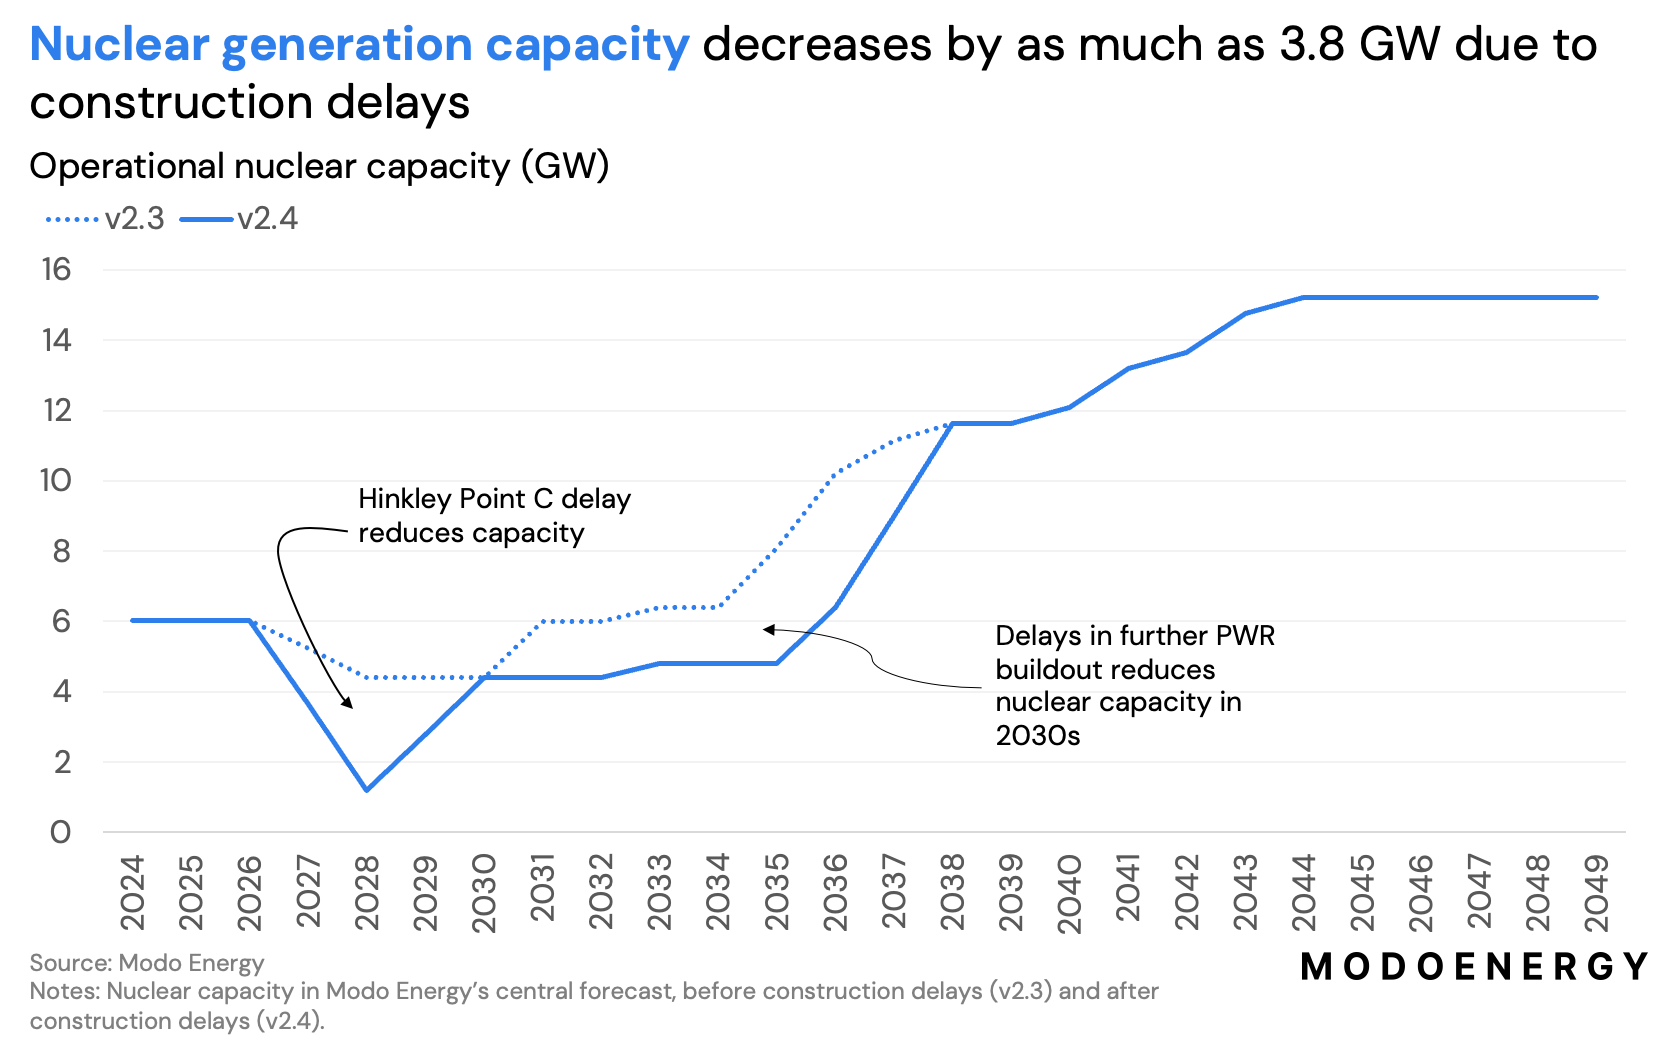 Changes in operational nuclear capacity between V2.3 and V2.4